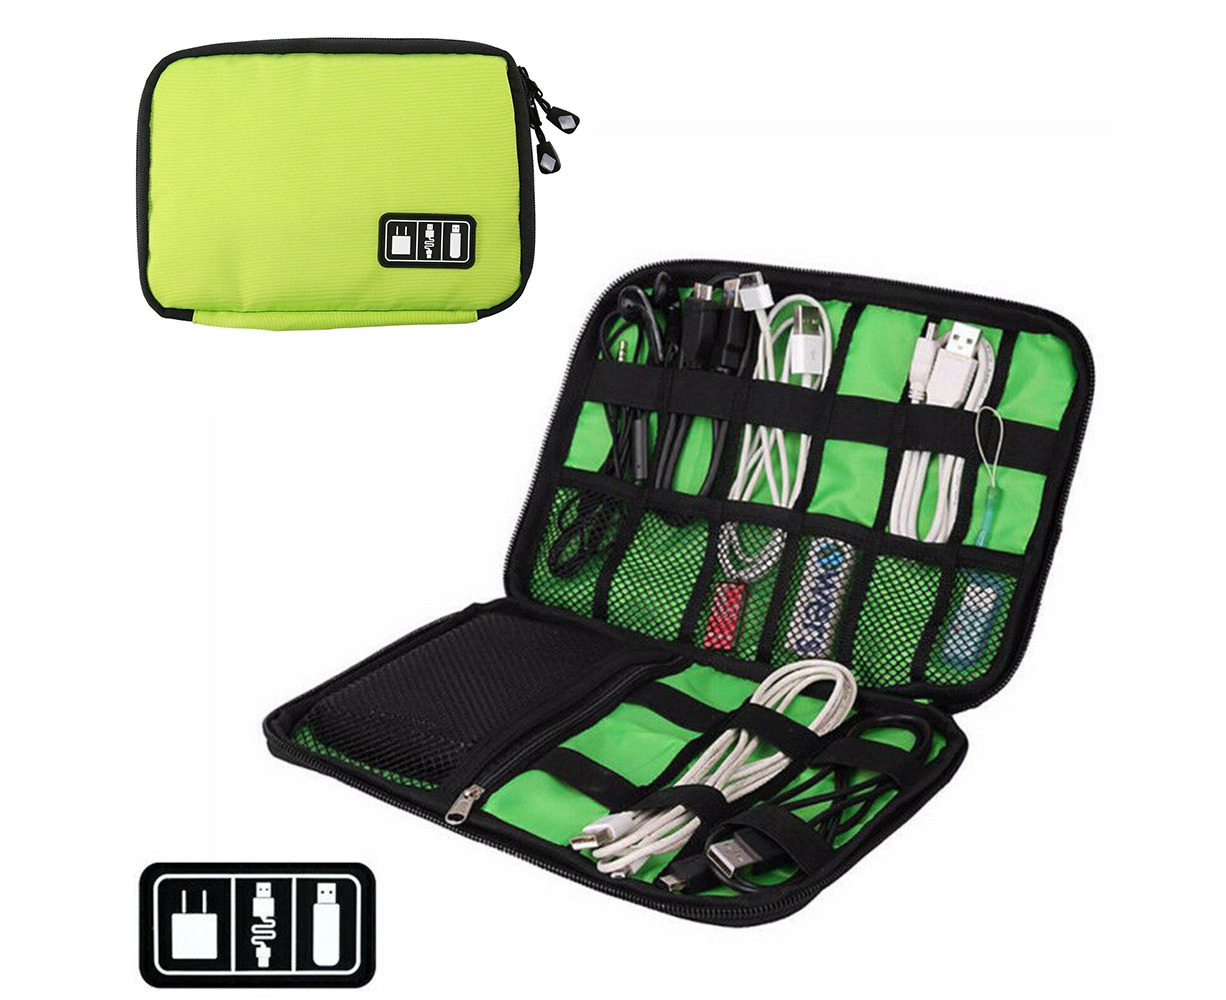 Dark Blue SD Card Electronic Organizer Travel Universal Cable Organizer Electronics Accessories Cases for Cable USB Phone Charger 